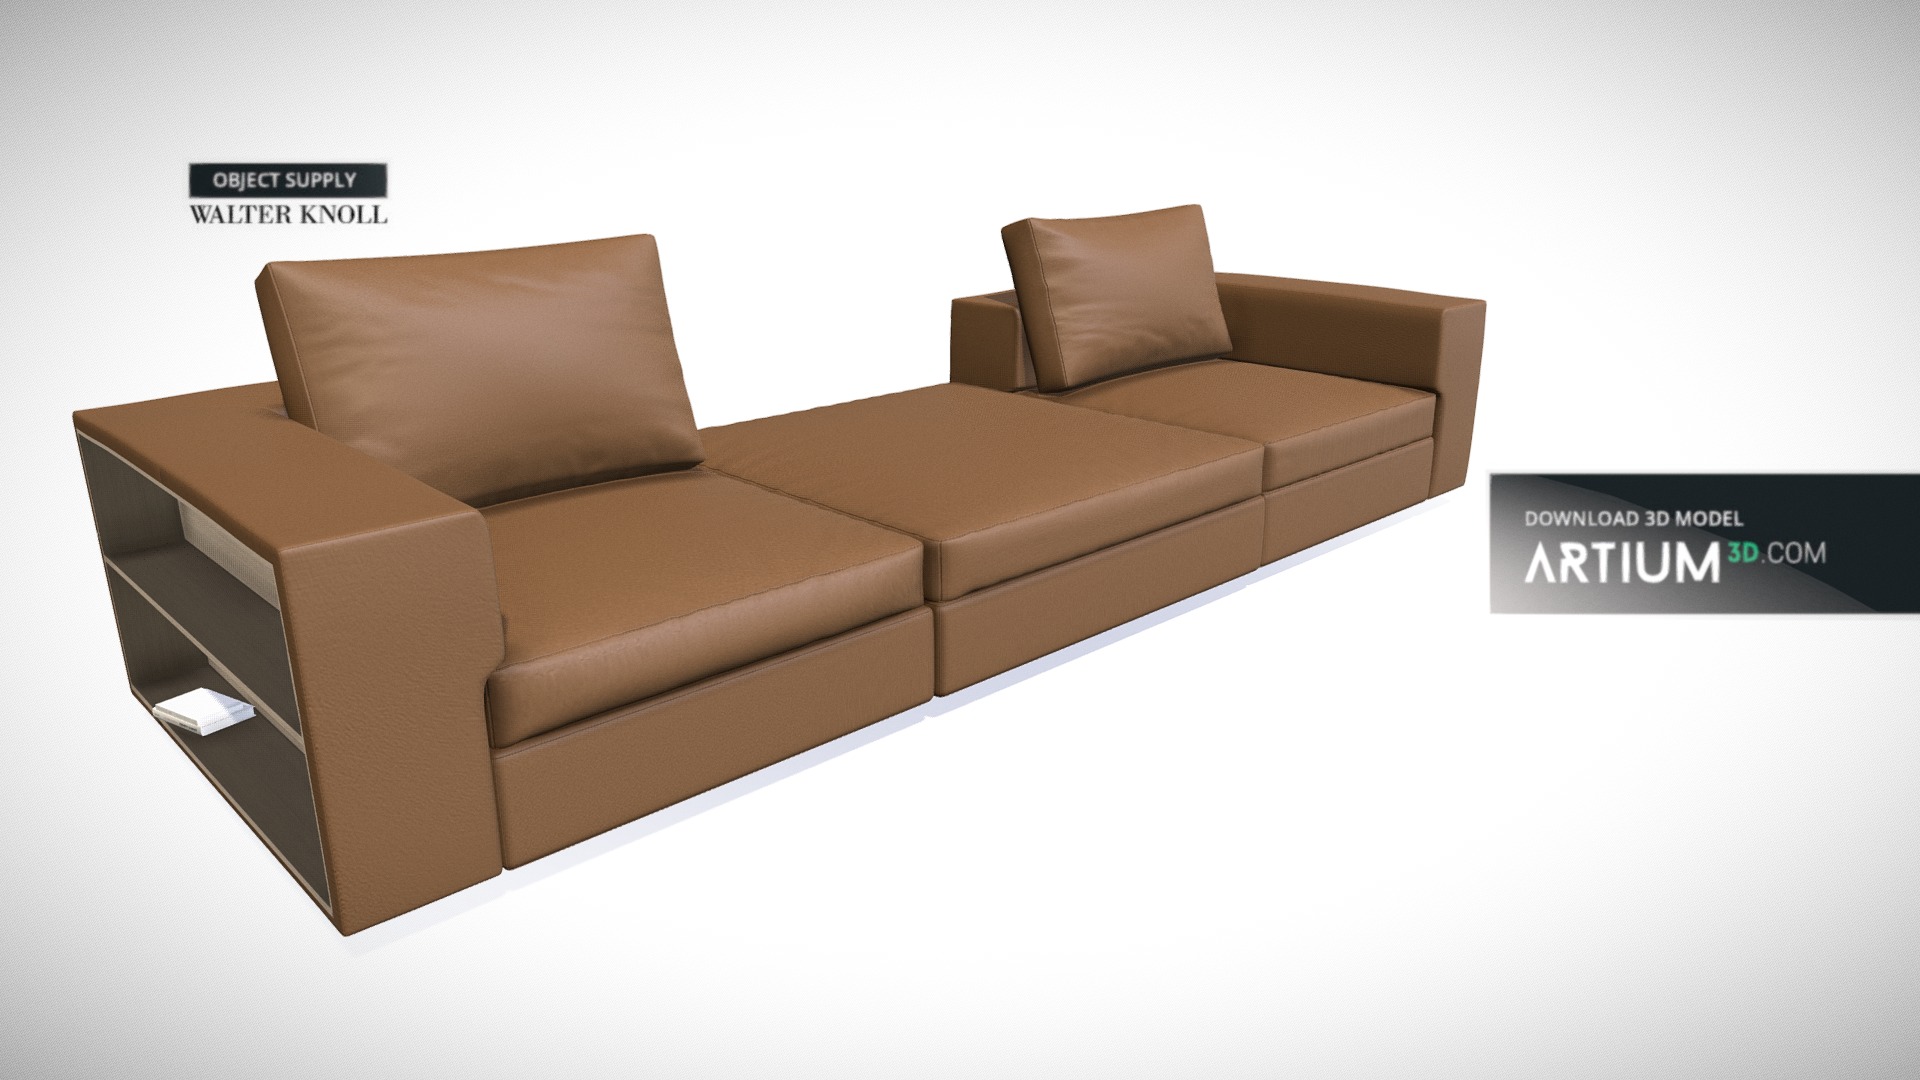 3D model Sofa Living Landscape 750 from Walter Knoll - This is a 3D model of the Sofa Living Landscape 750 from Walter Knoll. The 3D model is about a brown couch with a white background.